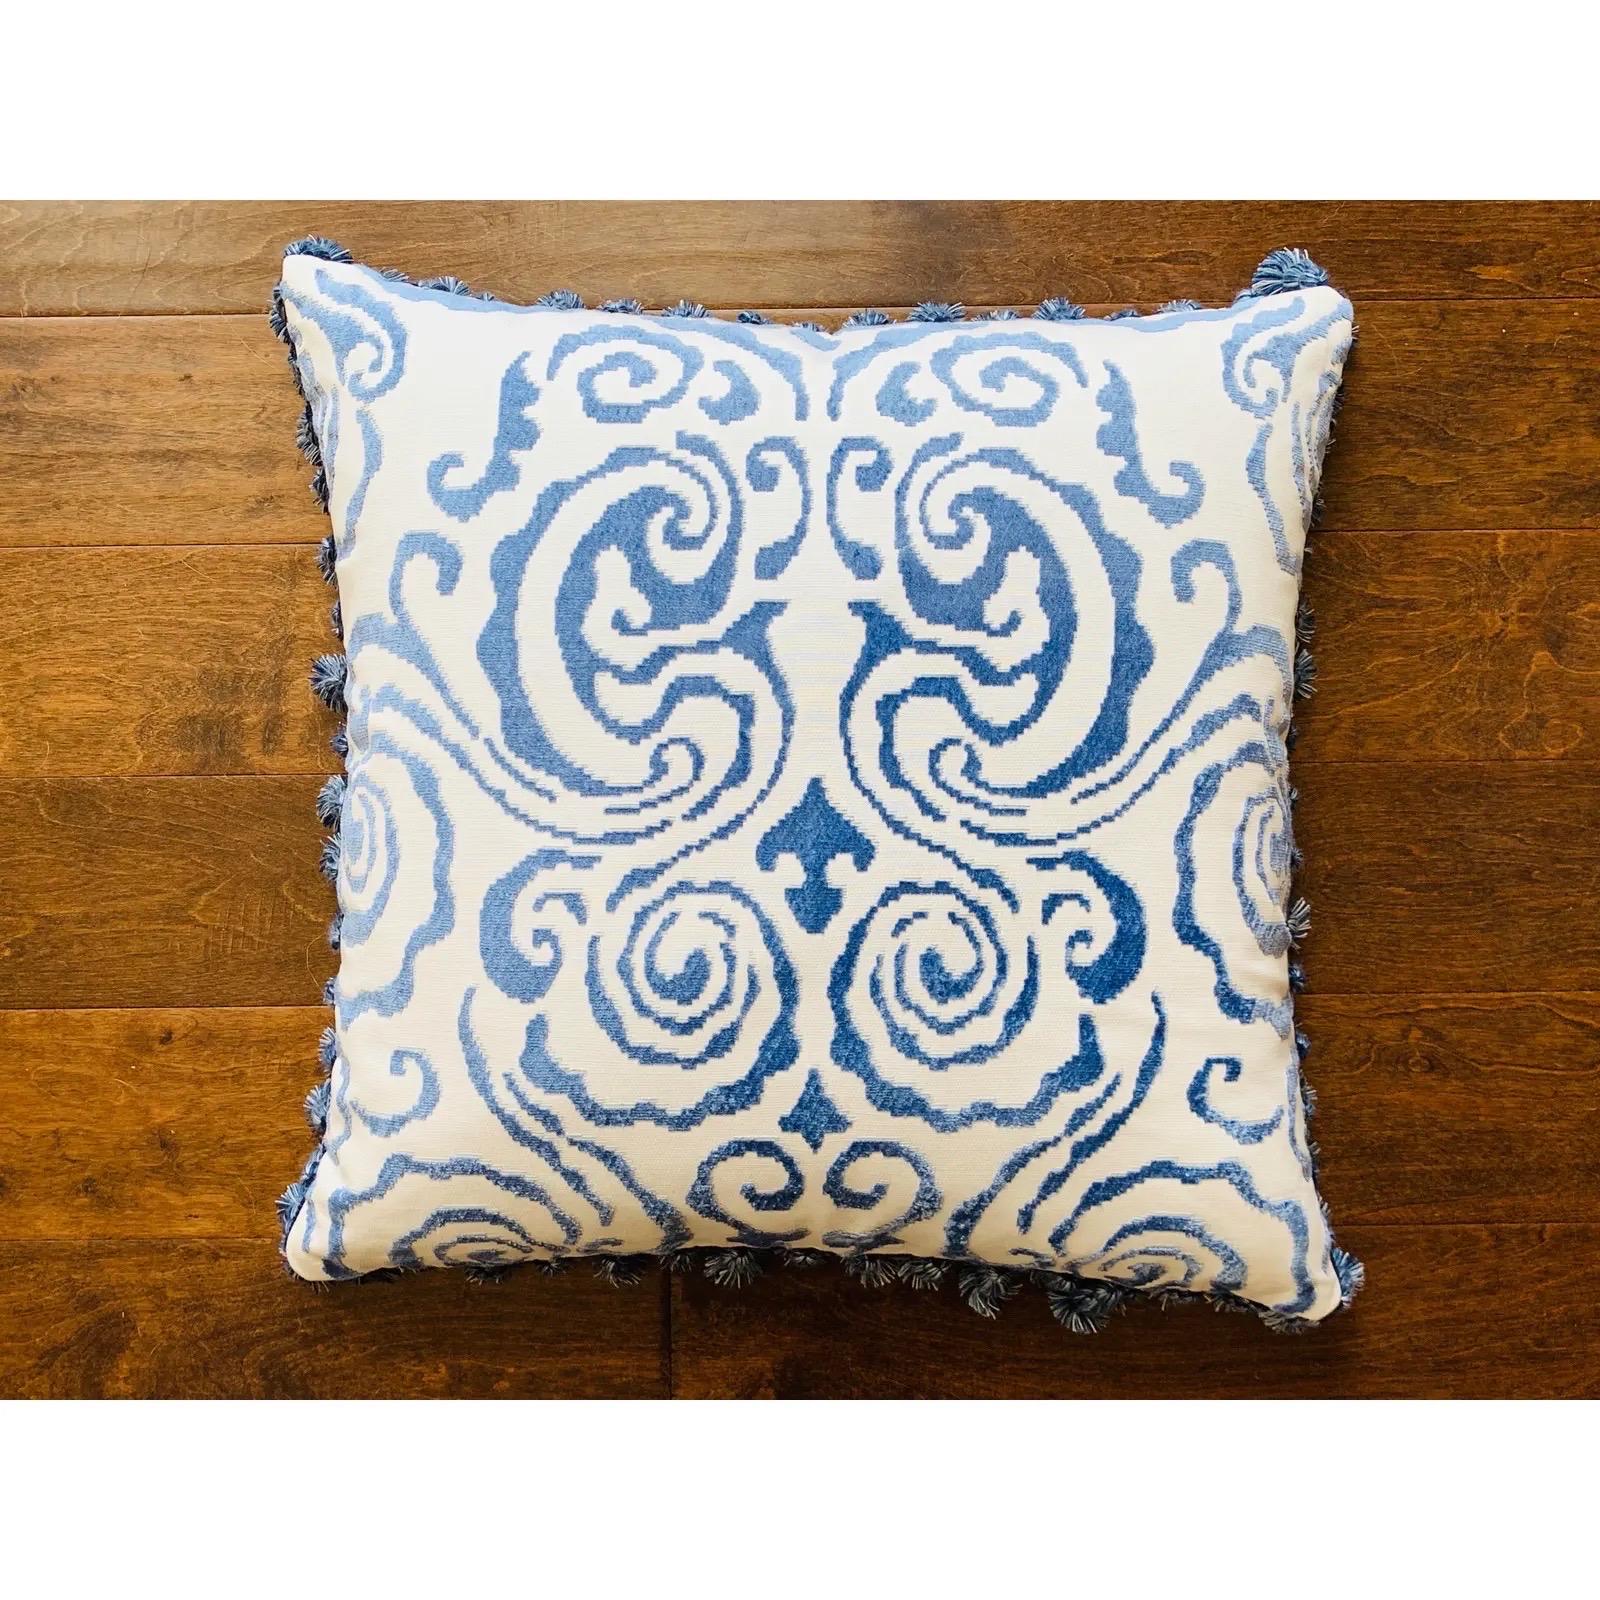 Listed is a stunning pair of new, custom-made Scalamandré 'Cirrus Velvet Damask' in the 'Morning Glory' color way, from Scalamandrés Chinois Chic collection. The raised cotton-velvet damask is slightly raised, giving a soft texture to the overall